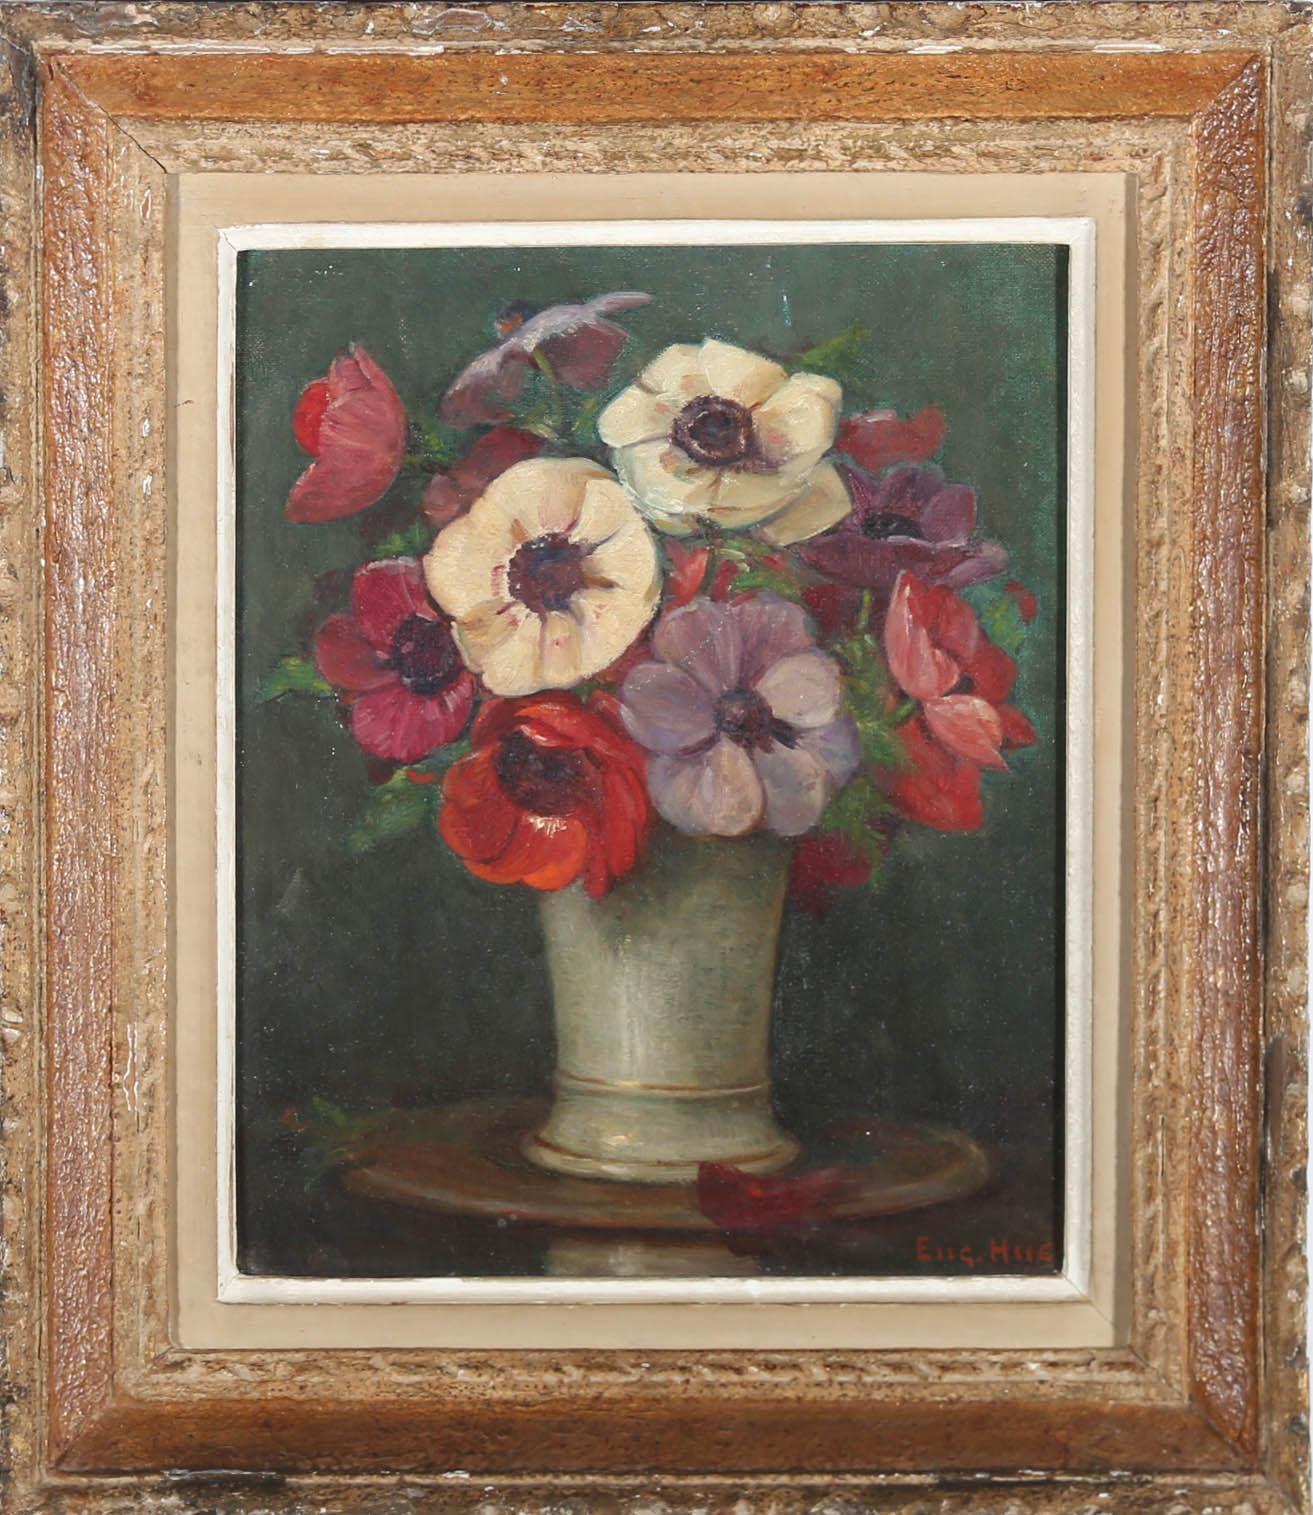 A very fine Mid Century French School still life, showing a delicate posy of vibrant anemones in a white porcelain vase. The artist has enhanced the colours of the flowers by setting them against a deep and rich green background. A petal and leaf